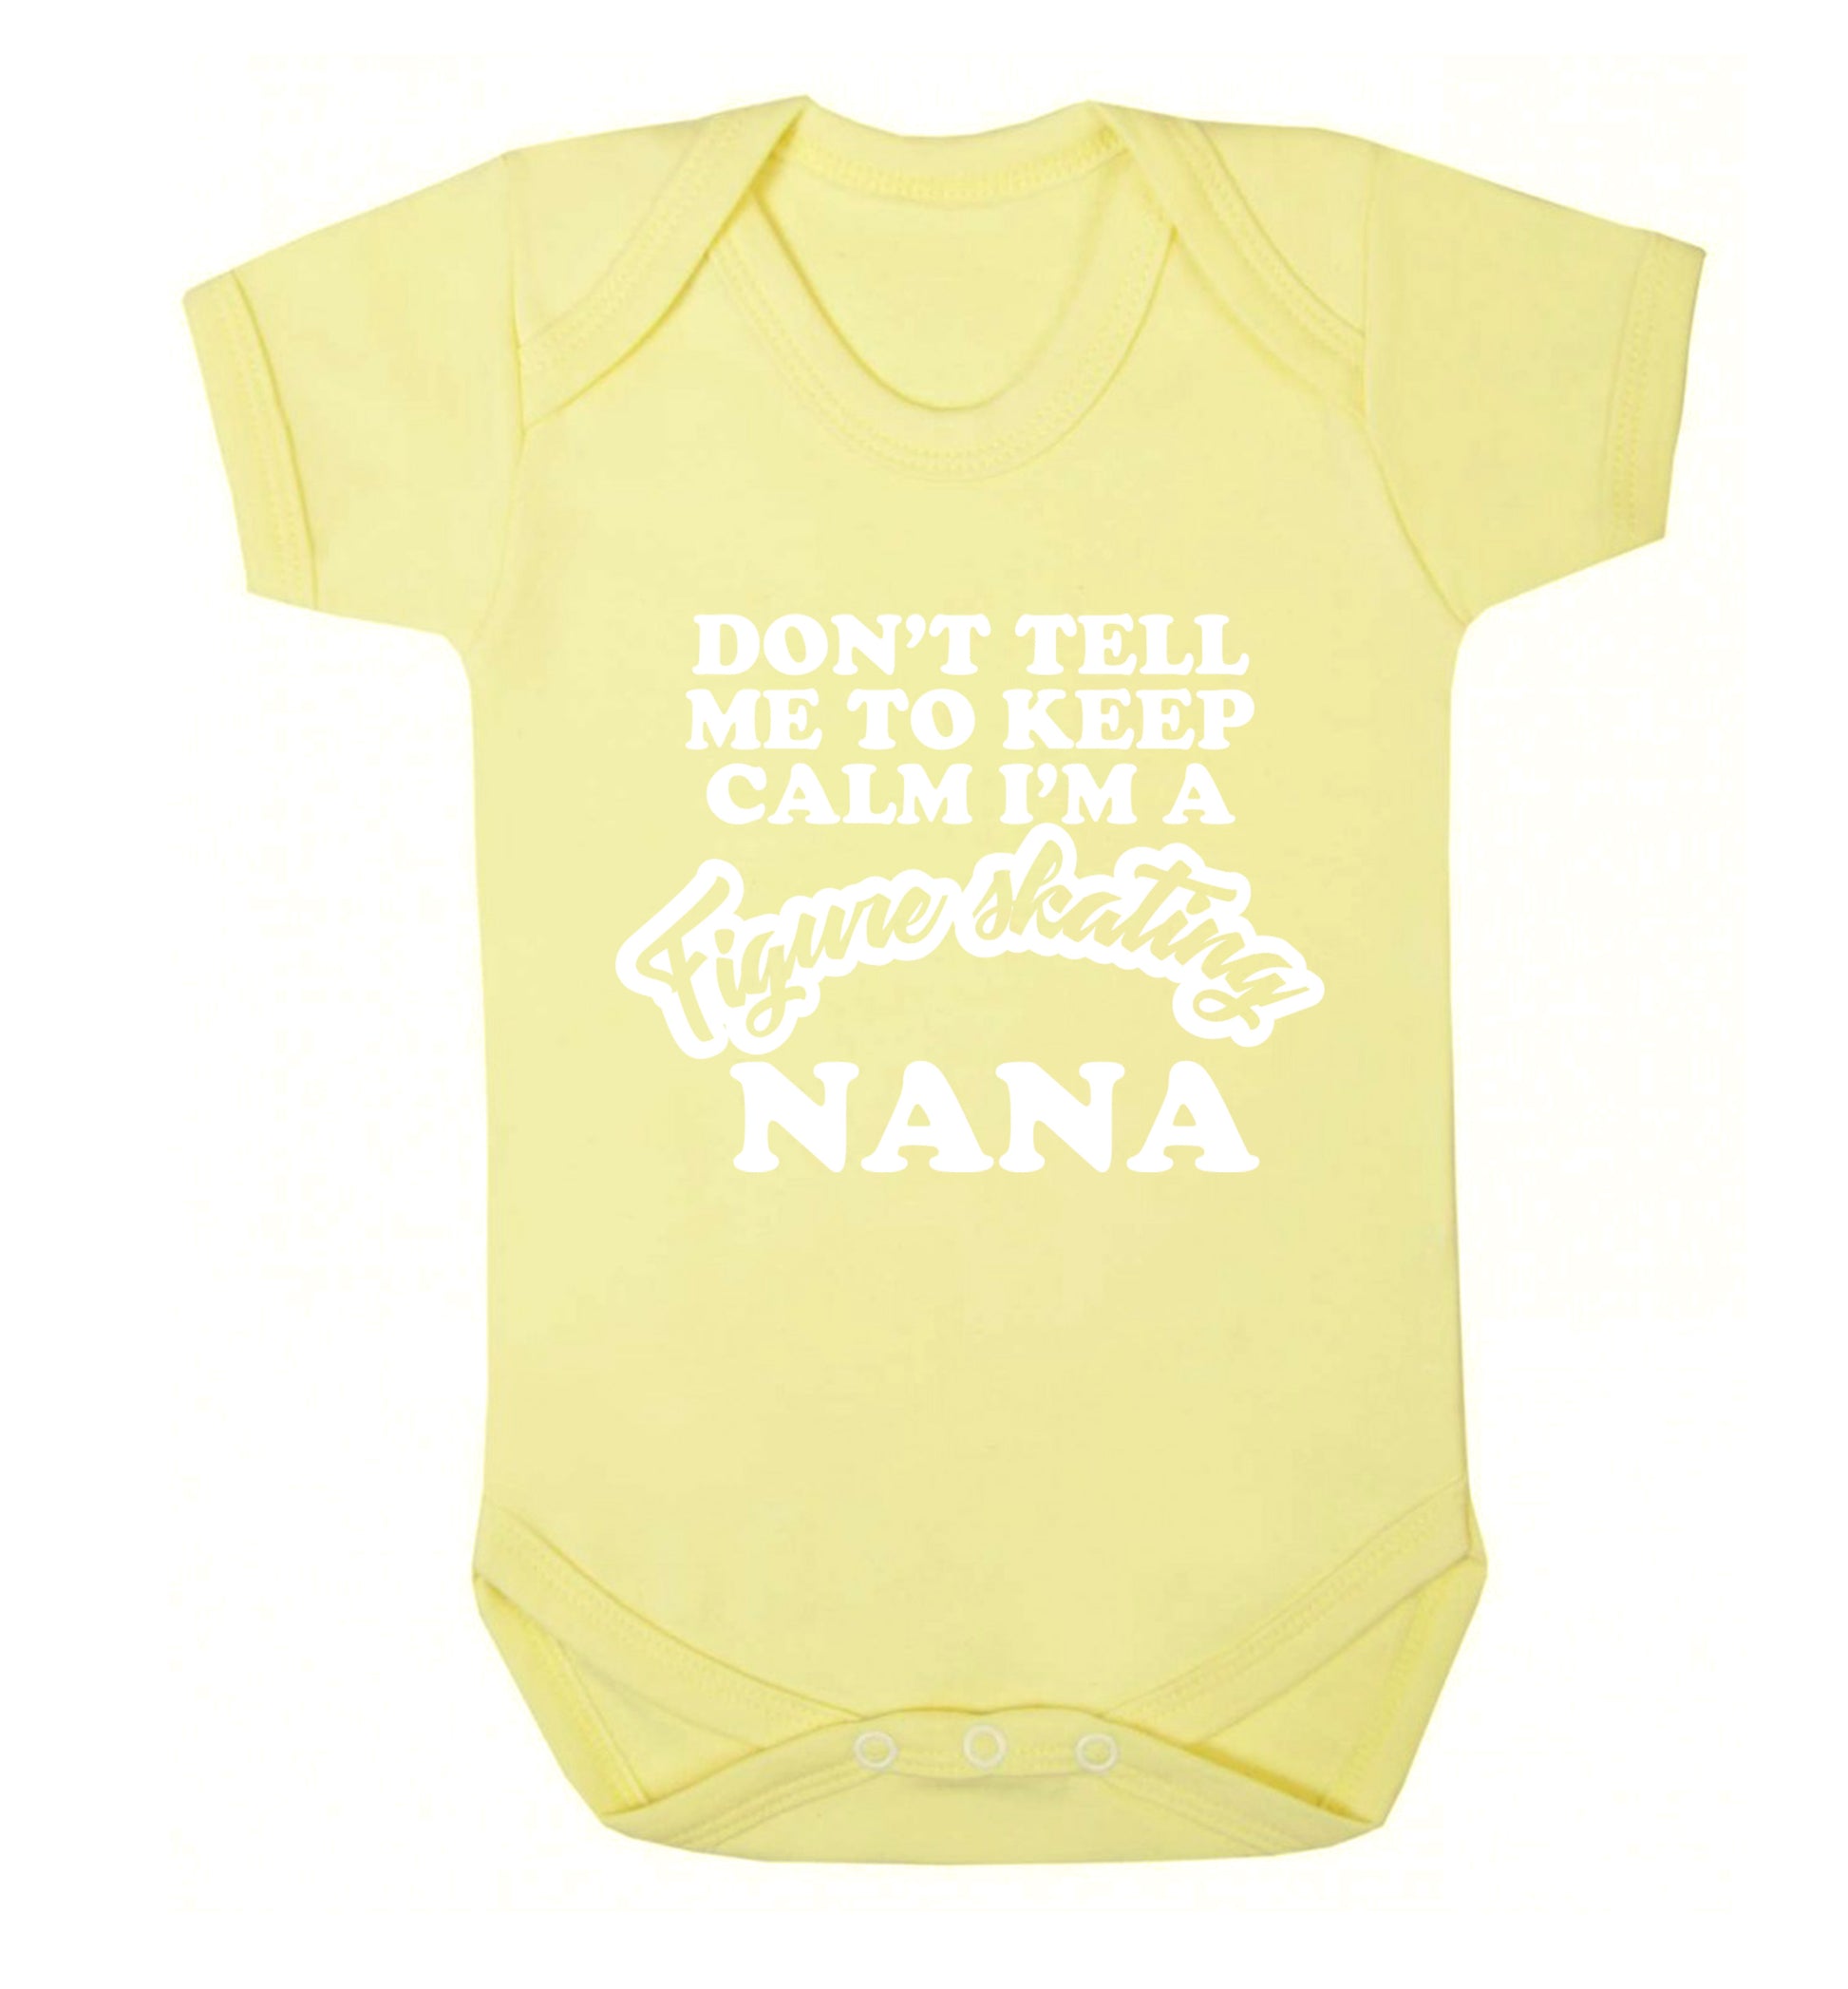 Don't tell me to keep calm I'm a figure skating nana Baby Vest pale yellow 18-24 months